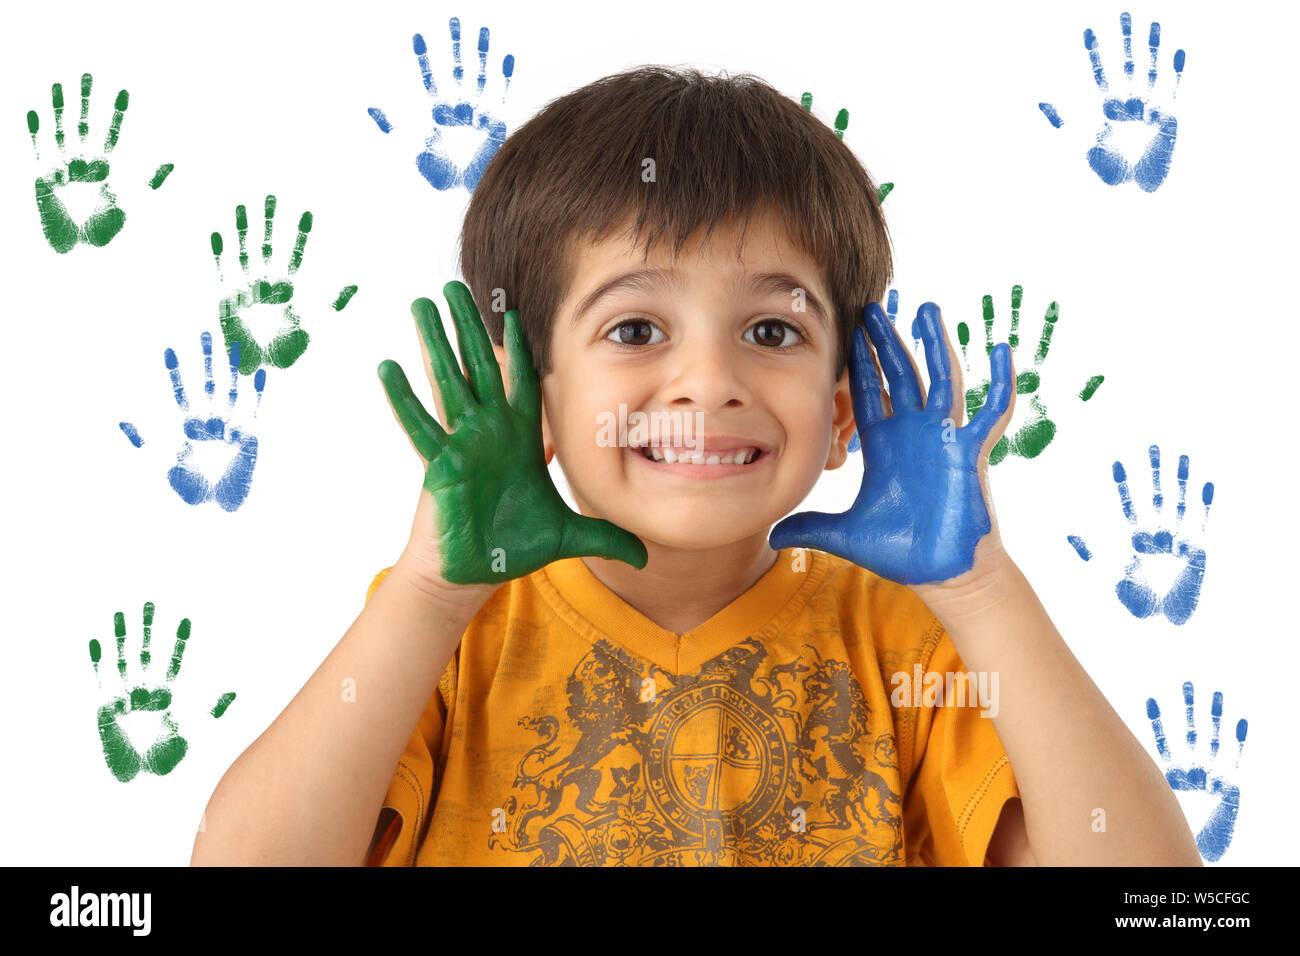 Portrait of a boy showing painted hands Stock Photo